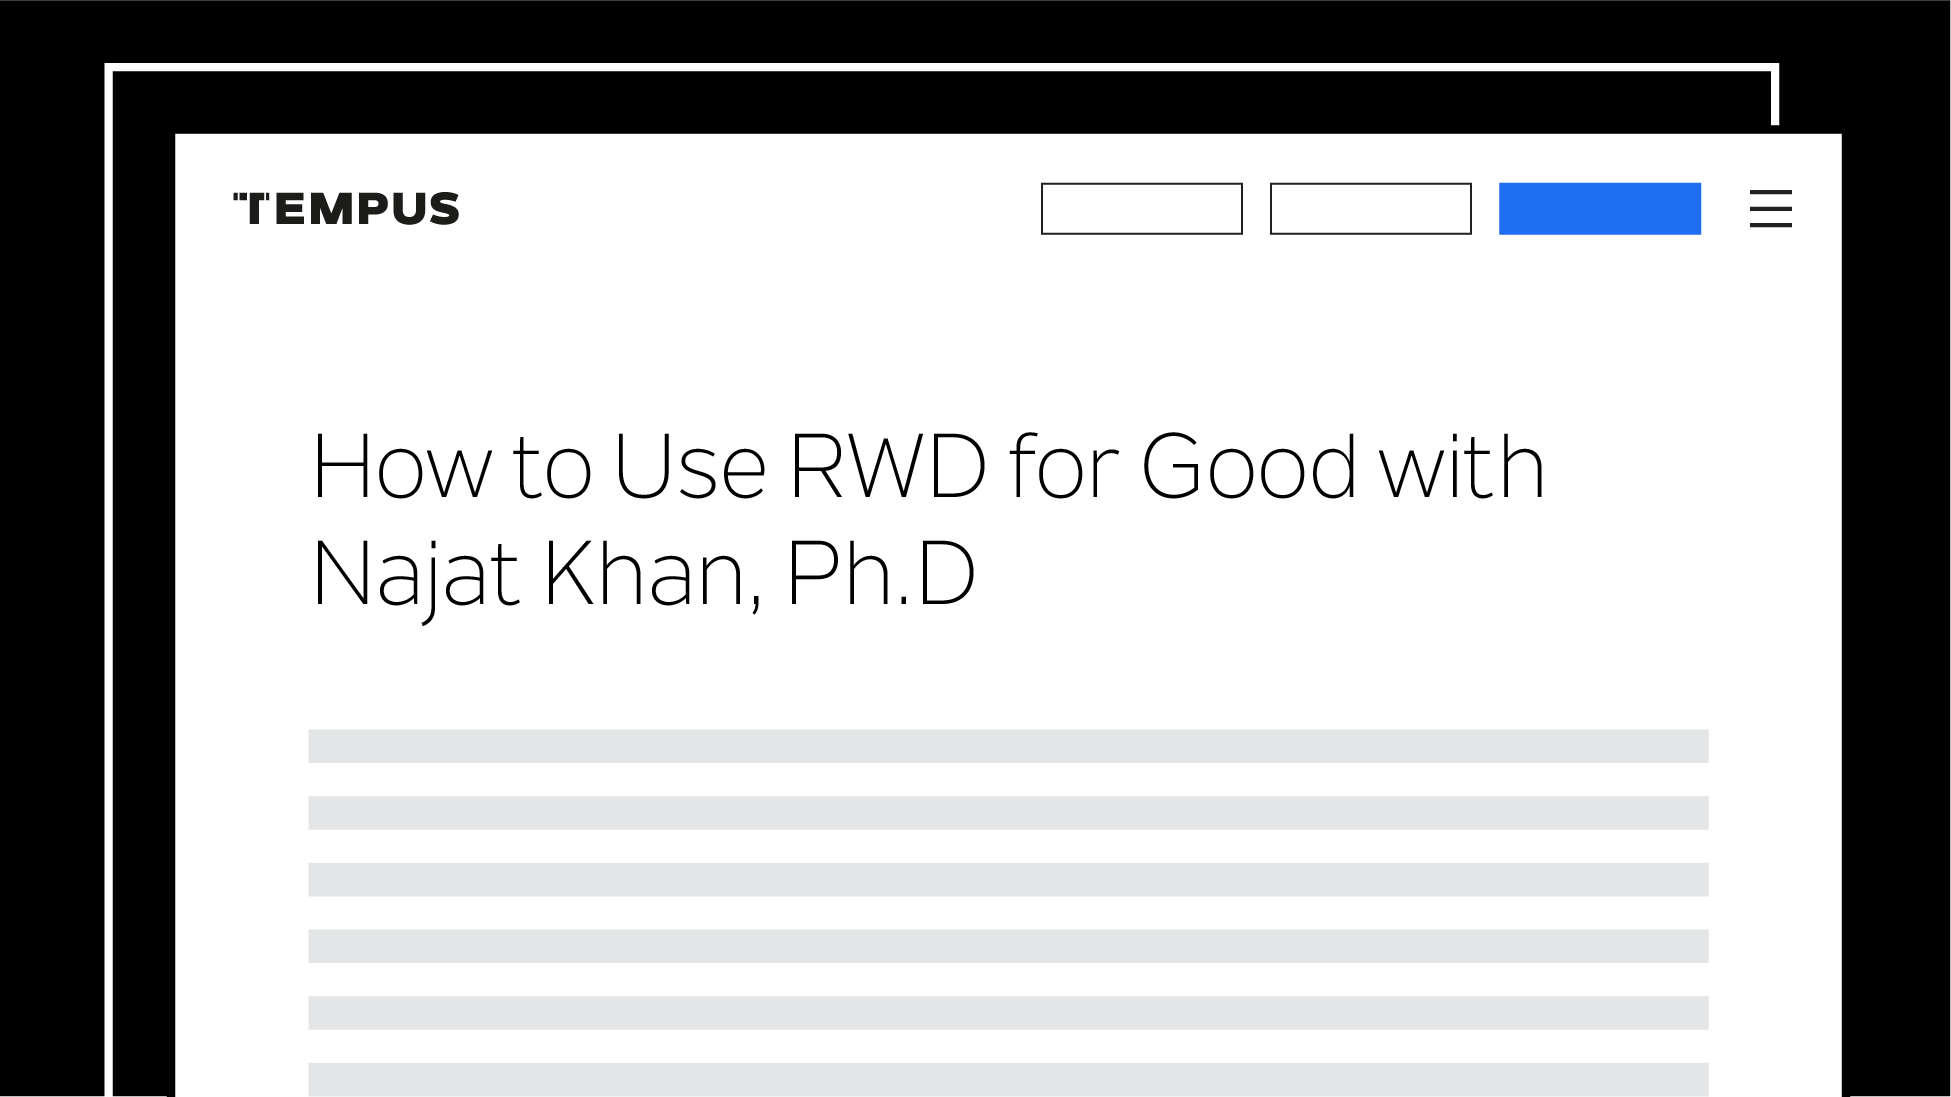 How to use RWD for good with Najat Khan, Ph.D